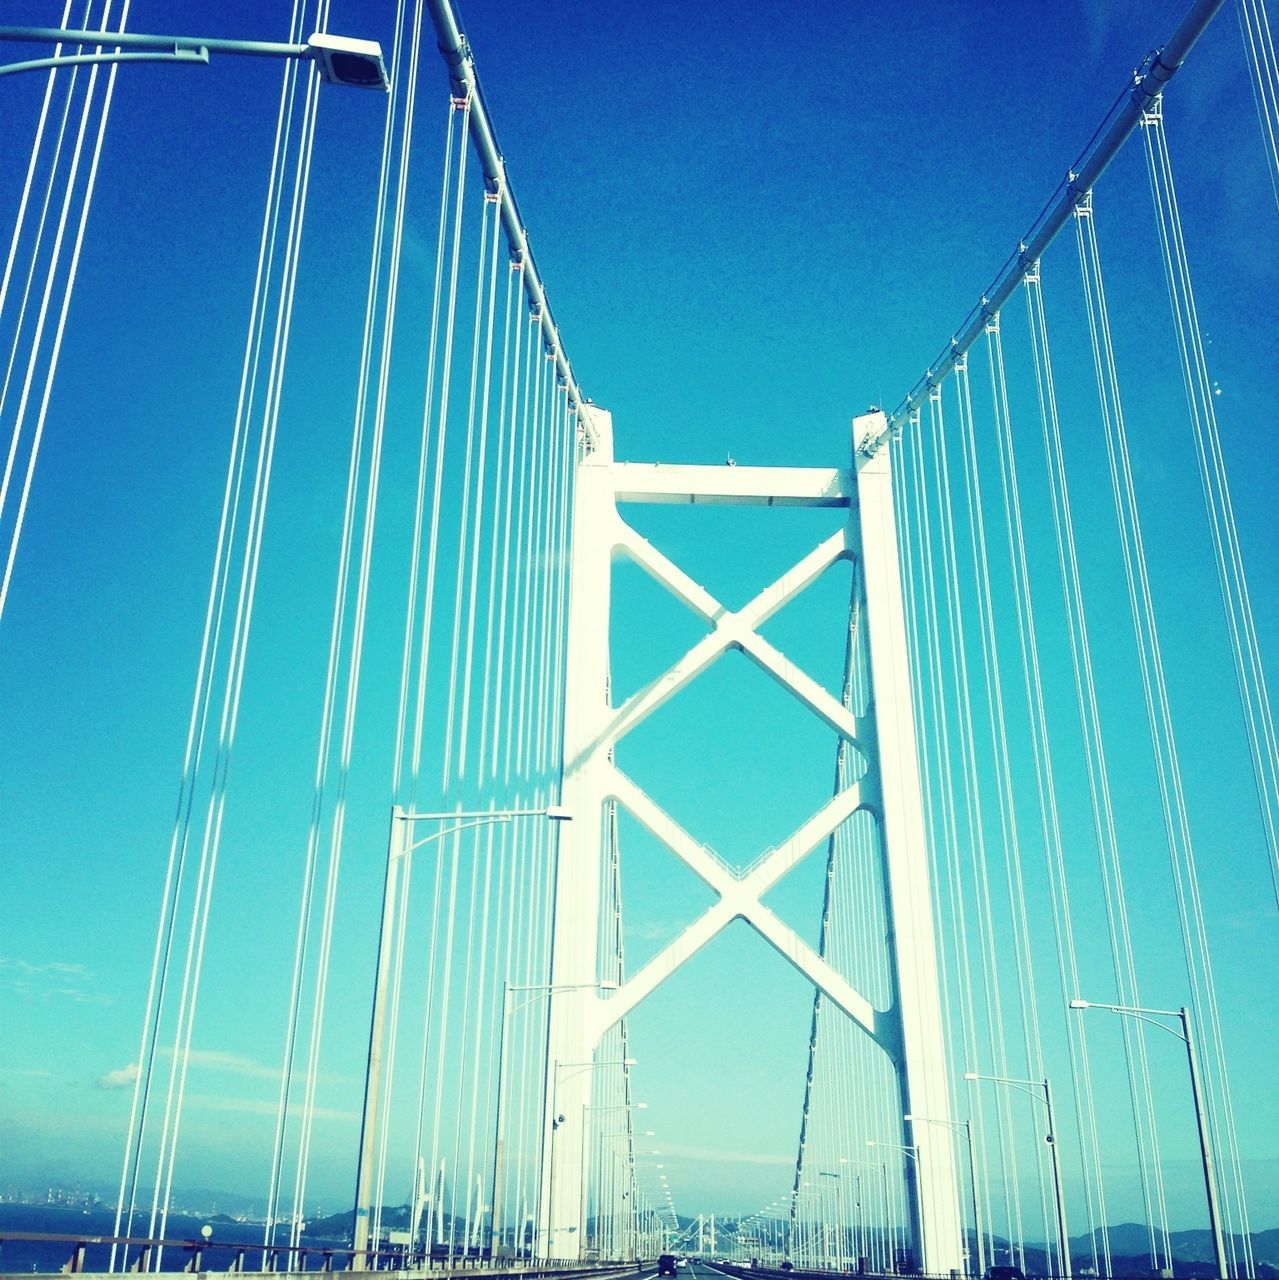 blue, connection, built structure, suspension bridge, clear sky, engineering, architecture, low angle view, bridge - man made structure, bridge, cable-stayed bridge, copy space, sky, transportation, outdoors, metal, no people, day, support, long